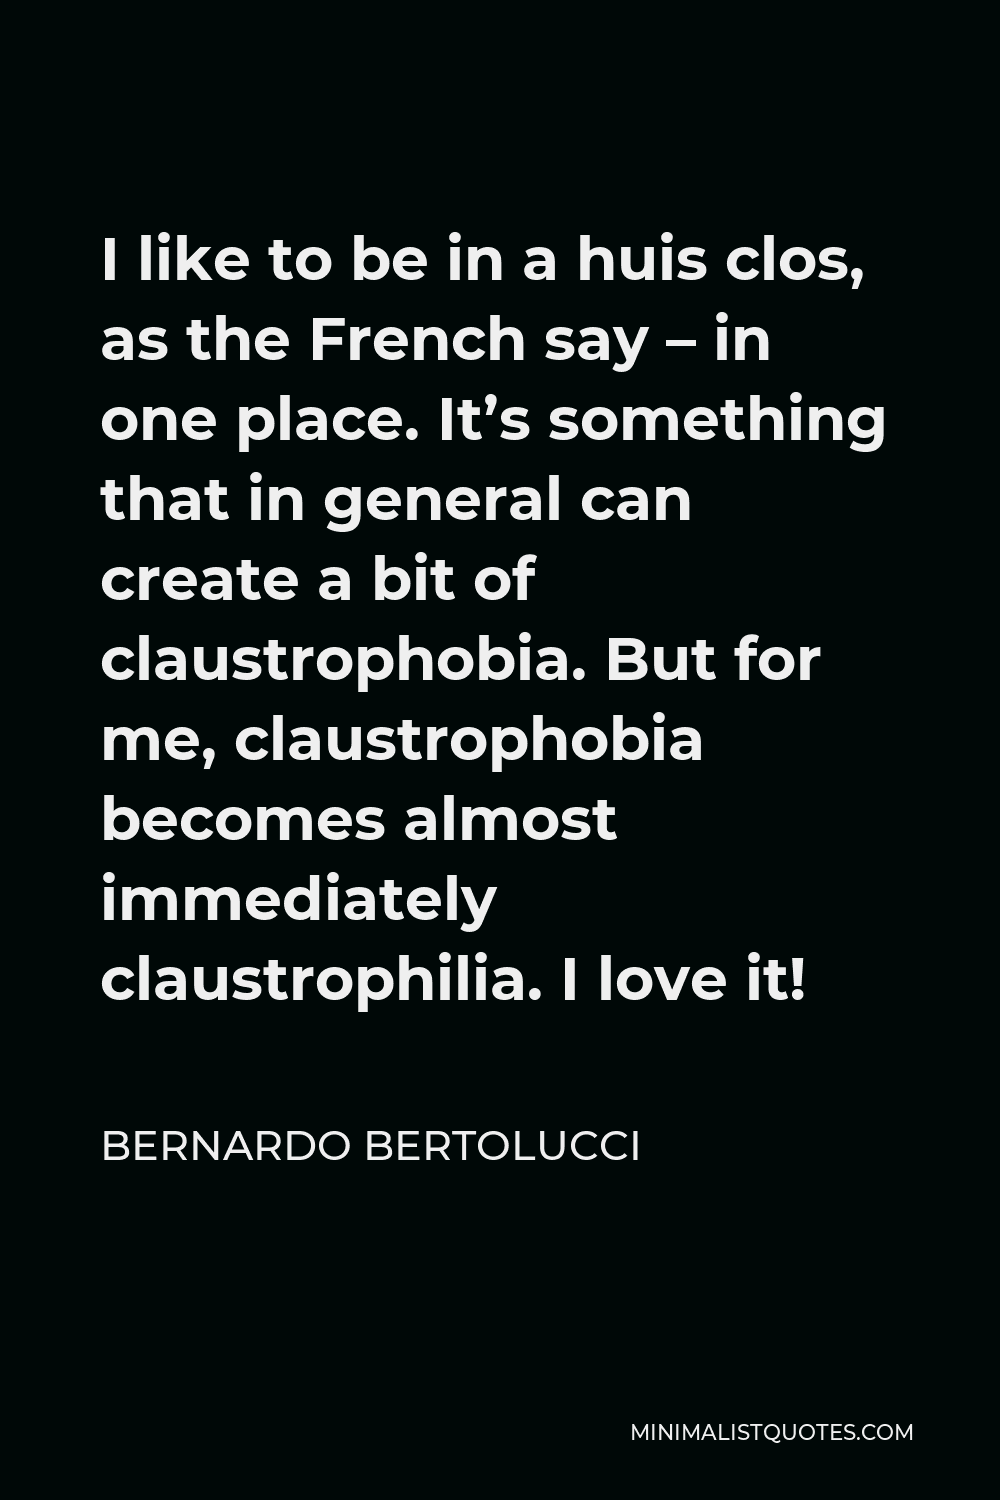 Bernardo Bertolucci Quote - I like to be in a huis clos, as the French say – in one place. It’s something that in general can create a bit of claustrophobia. But for me, claustrophobia becomes almost immediately claustrophilia. I love it!